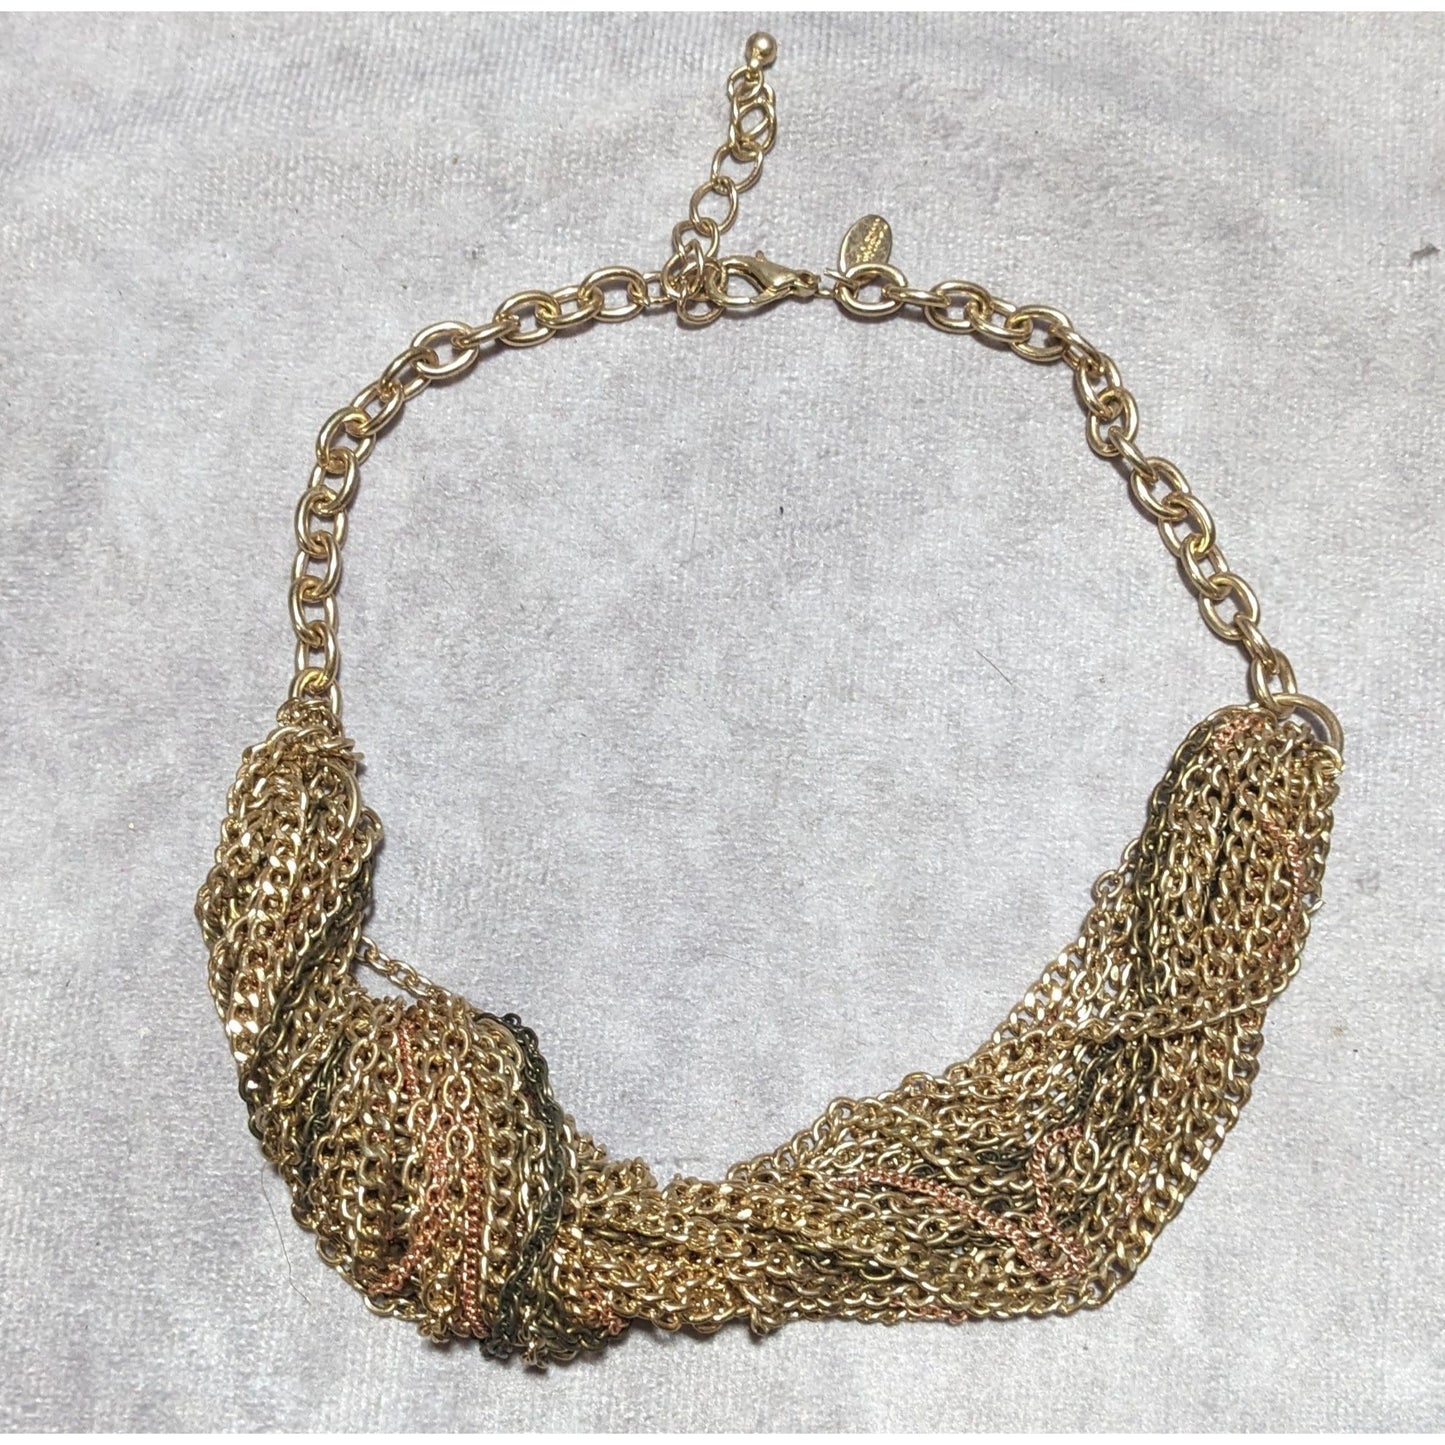 Express Gold Multichain Knotted Necklace